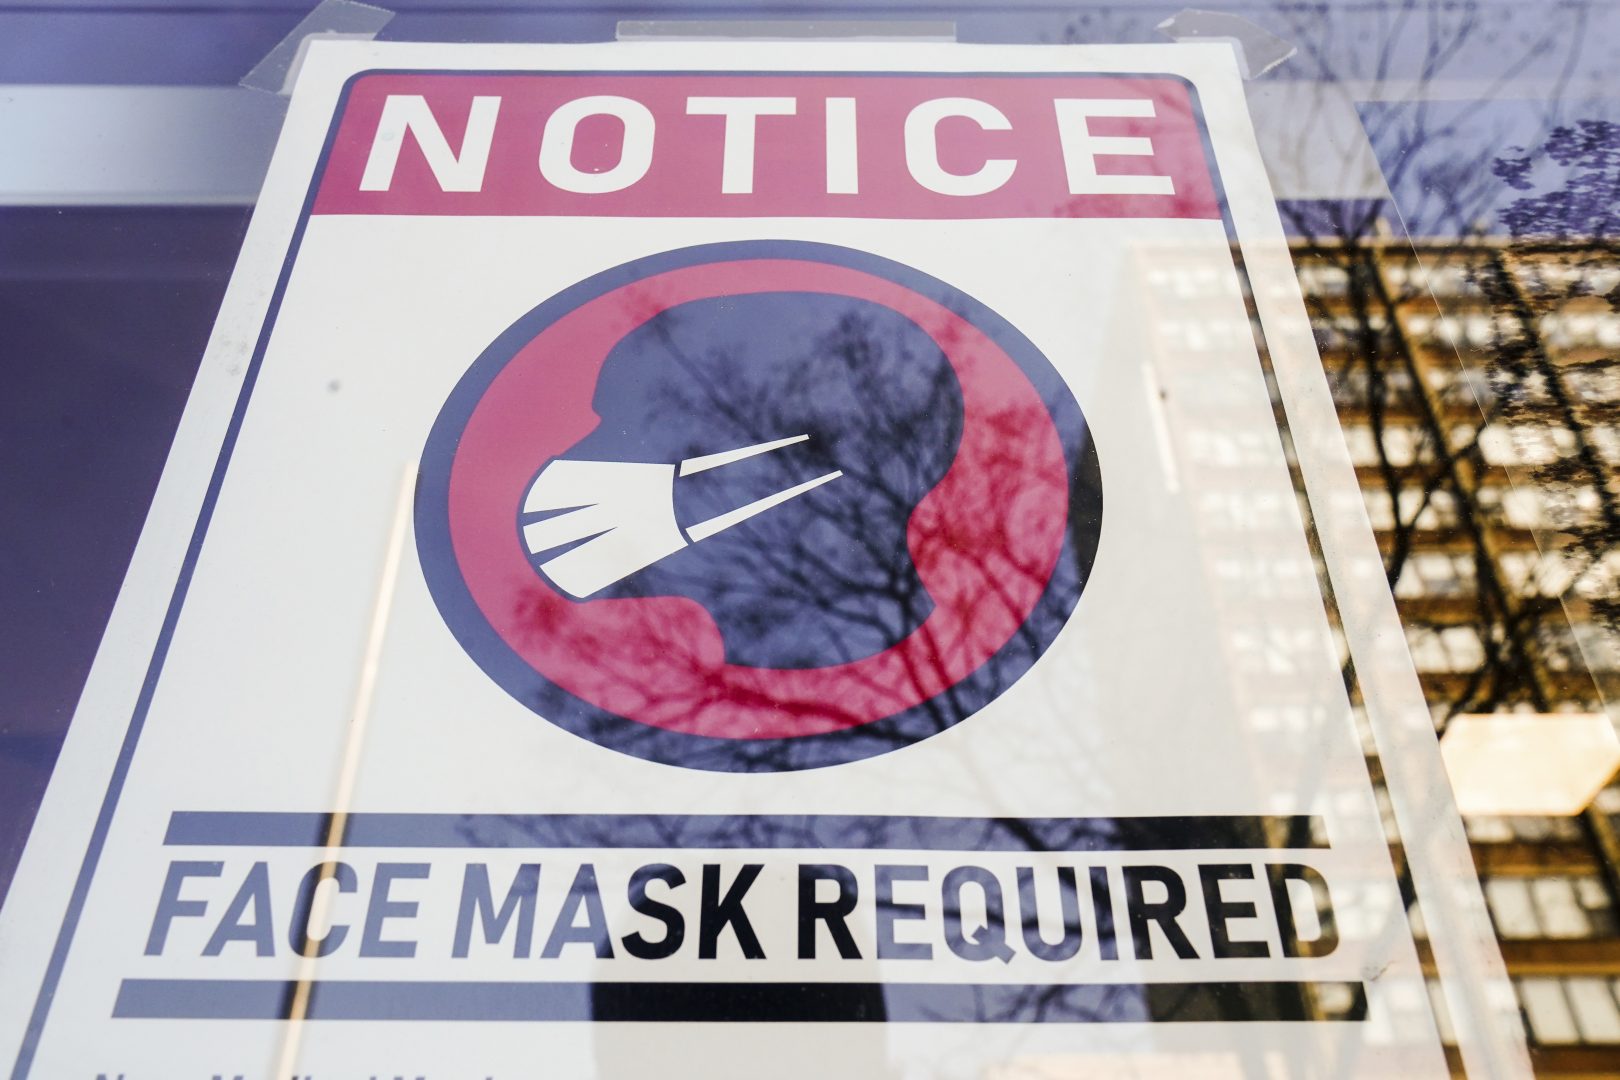 FILE - A sign requiring masks as a precaution against the spread of the coronavirus on a store front in Philadelphia, is seen Feb. 16, 2022. Philadelphia is reinstating its indoor mask mandate after reporting a sharp increase in coronavirus infections, Dr. Cheryl Bettigole, the city's top health official, announced Monday, April 11, 2022. Confirmed COVID-19 cases have risen more than 50% in 10 days, the threshold at which the city's guidelines call for people to wear masks indoors. (AP Photo/Matt Rourke, File)